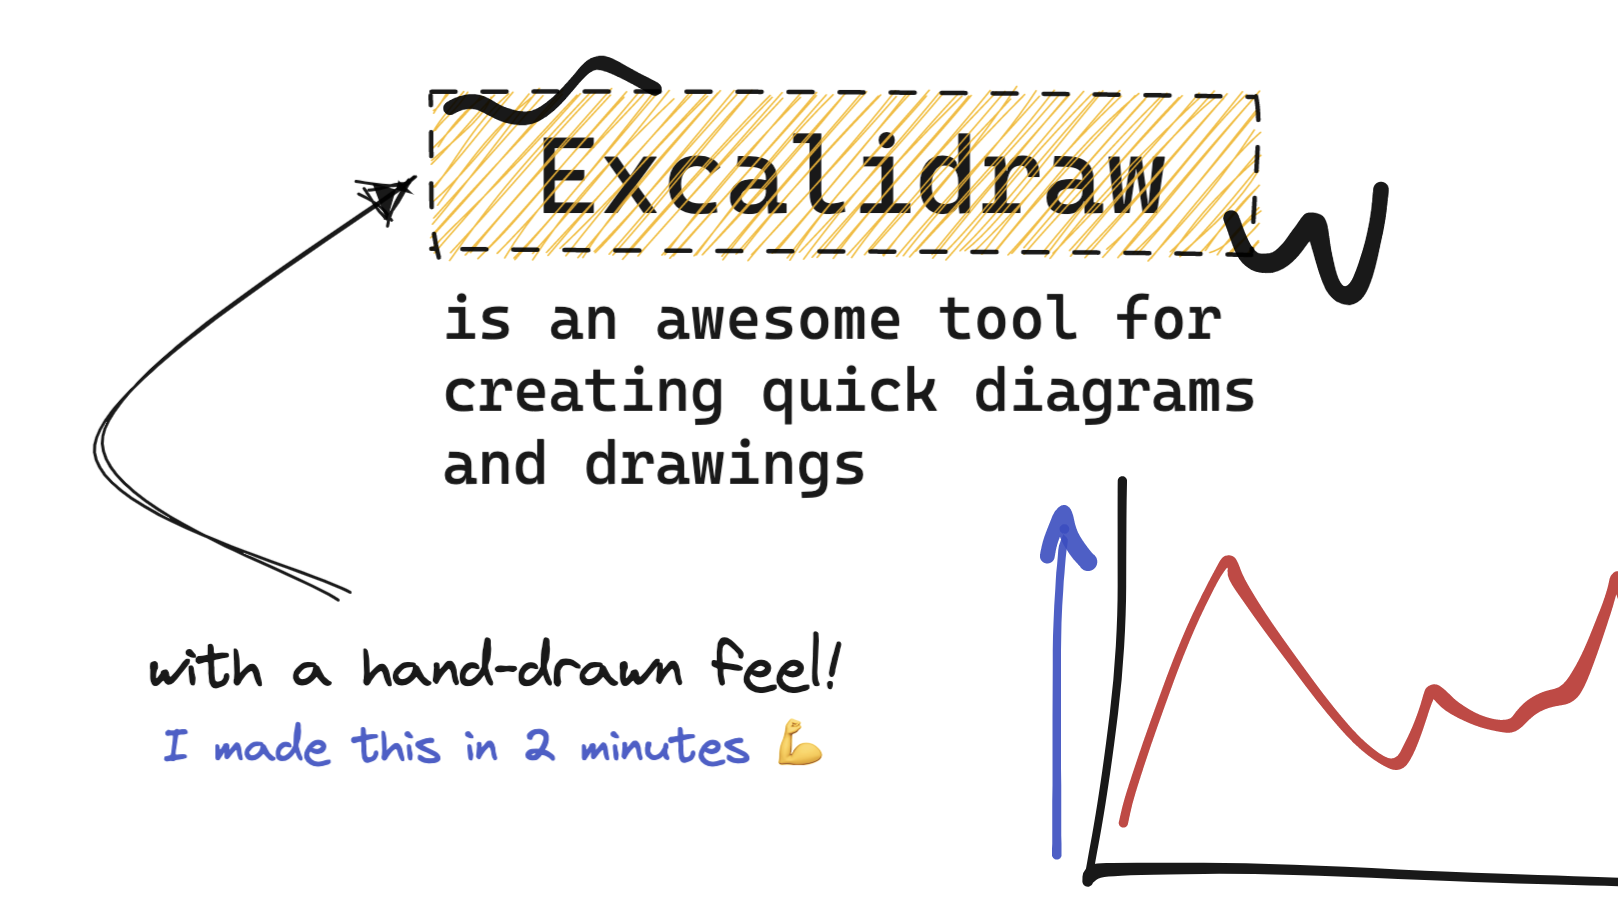 An Excalidraw drawing that reads "Excalidraw is an awesome tool for creating quick diagrams and drawings". An arrow points to this text, with more text below reading "with a hand-drawn feel!". "I made this in 2 minutes 💪". A  line graph with fake data is seen on the right.